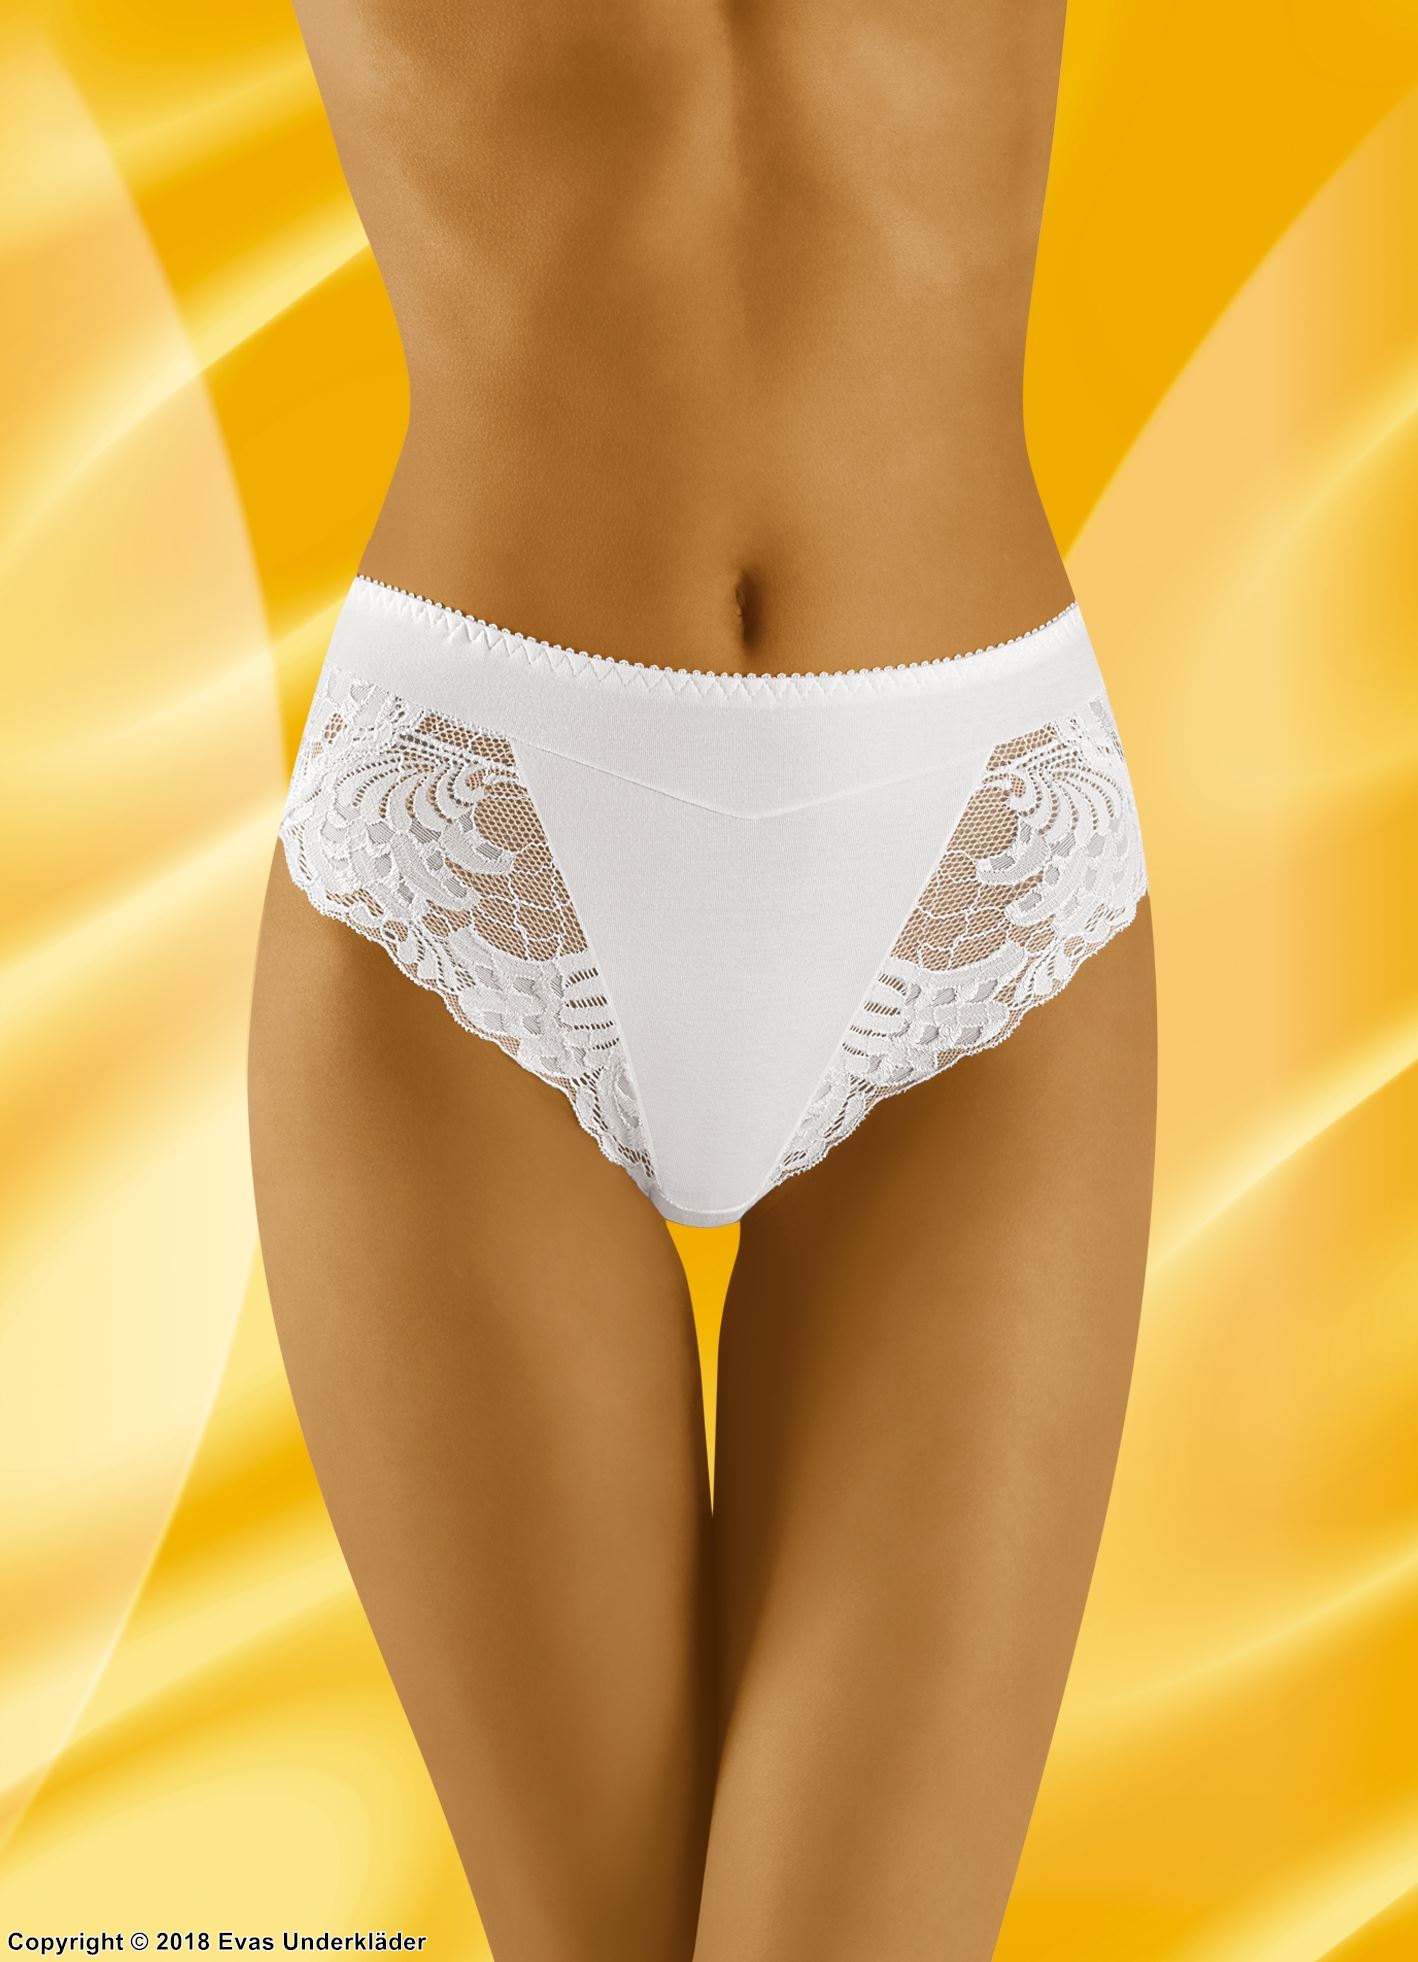 Comfortable briefs, high quality cotton, lace panel, slightly higher waist